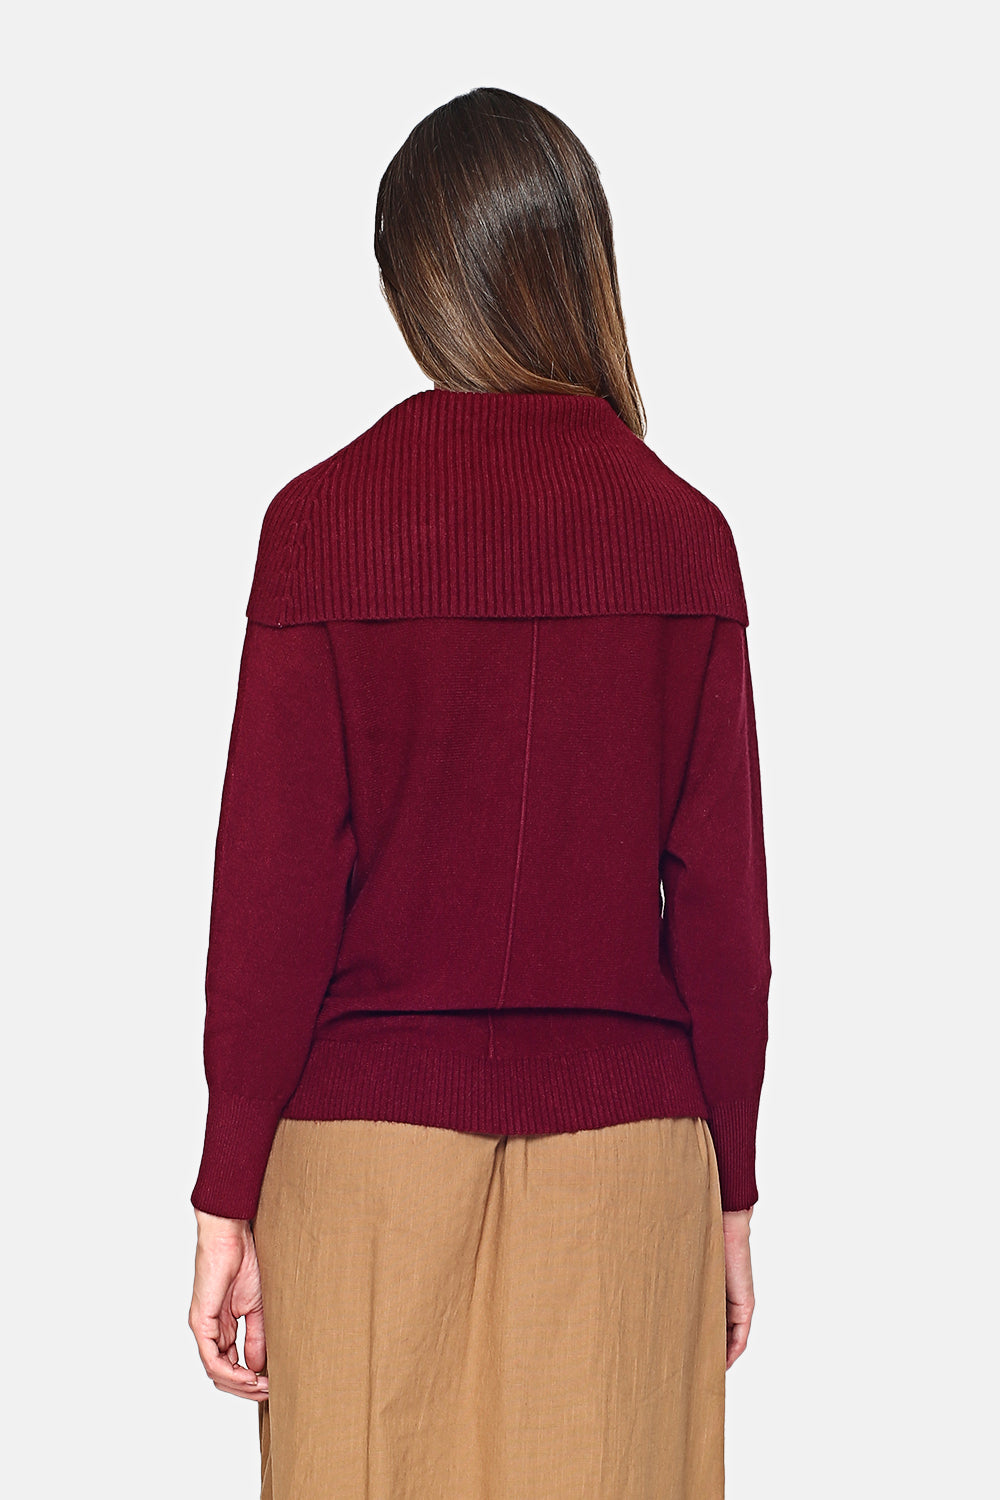 Nervous ball-neck sweater in front of batwing sleeves